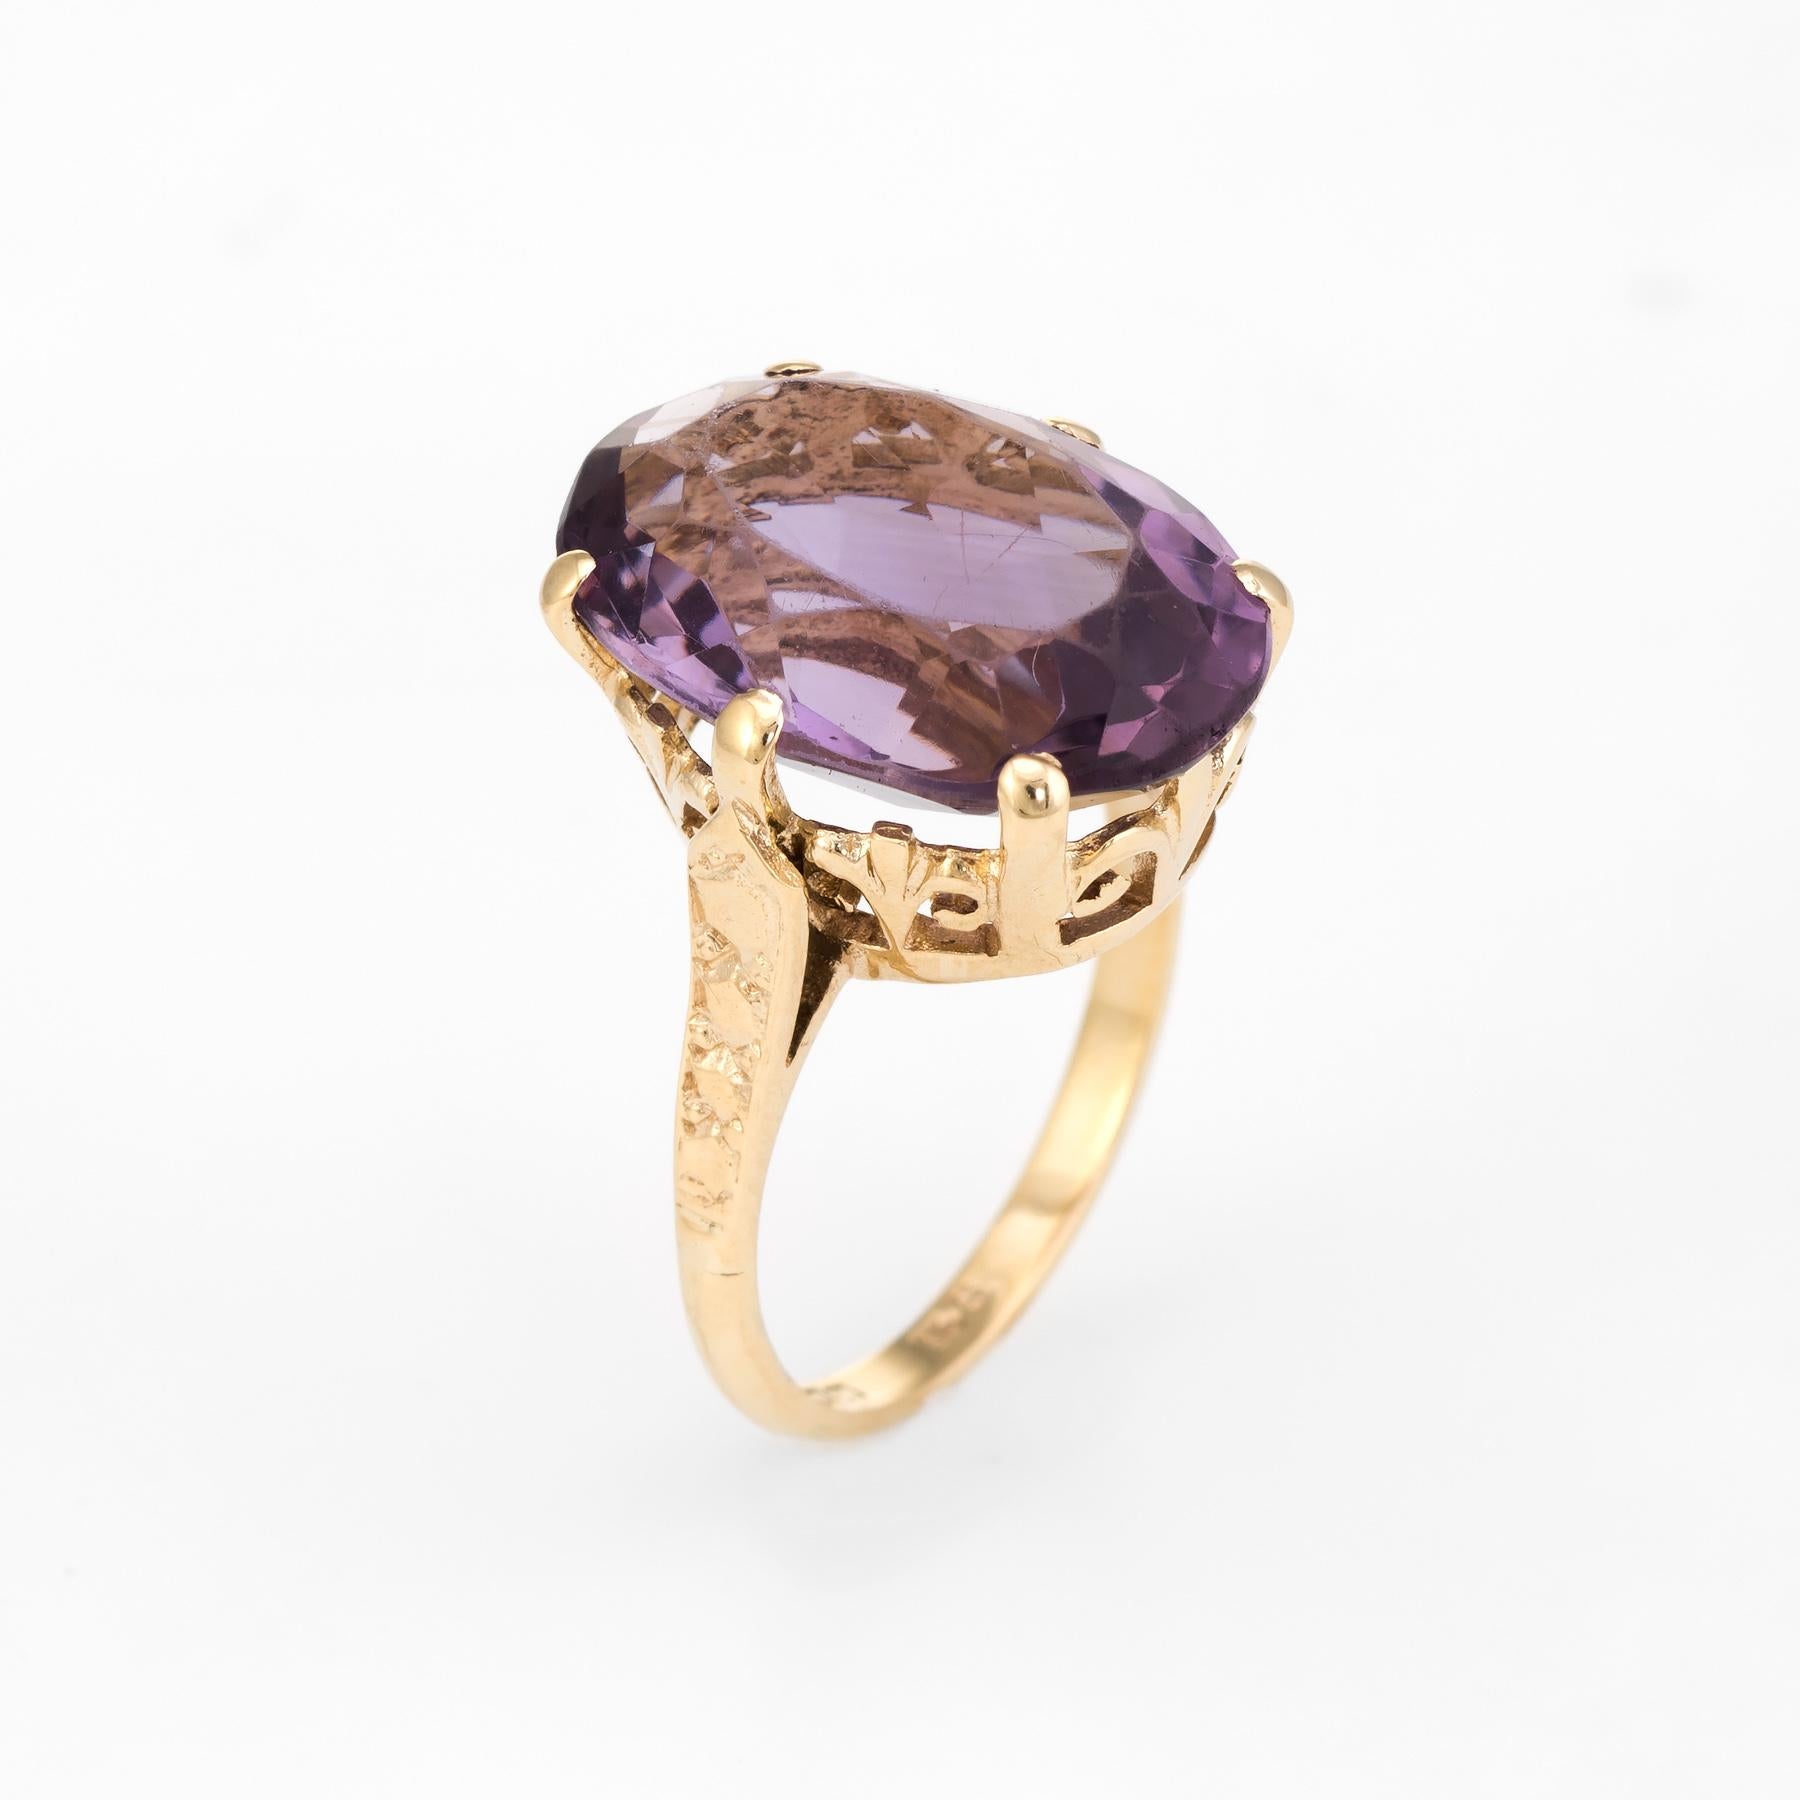 Circa 1972, a finely detailed vintage cocktail ring is crafted in 9 karat yellow gold. 

The large faceted oval cut amethyst measures 18mm x 13mm and is estimated at 11 carats. The amethyst is in excellent condition and free of cracks or chips. we